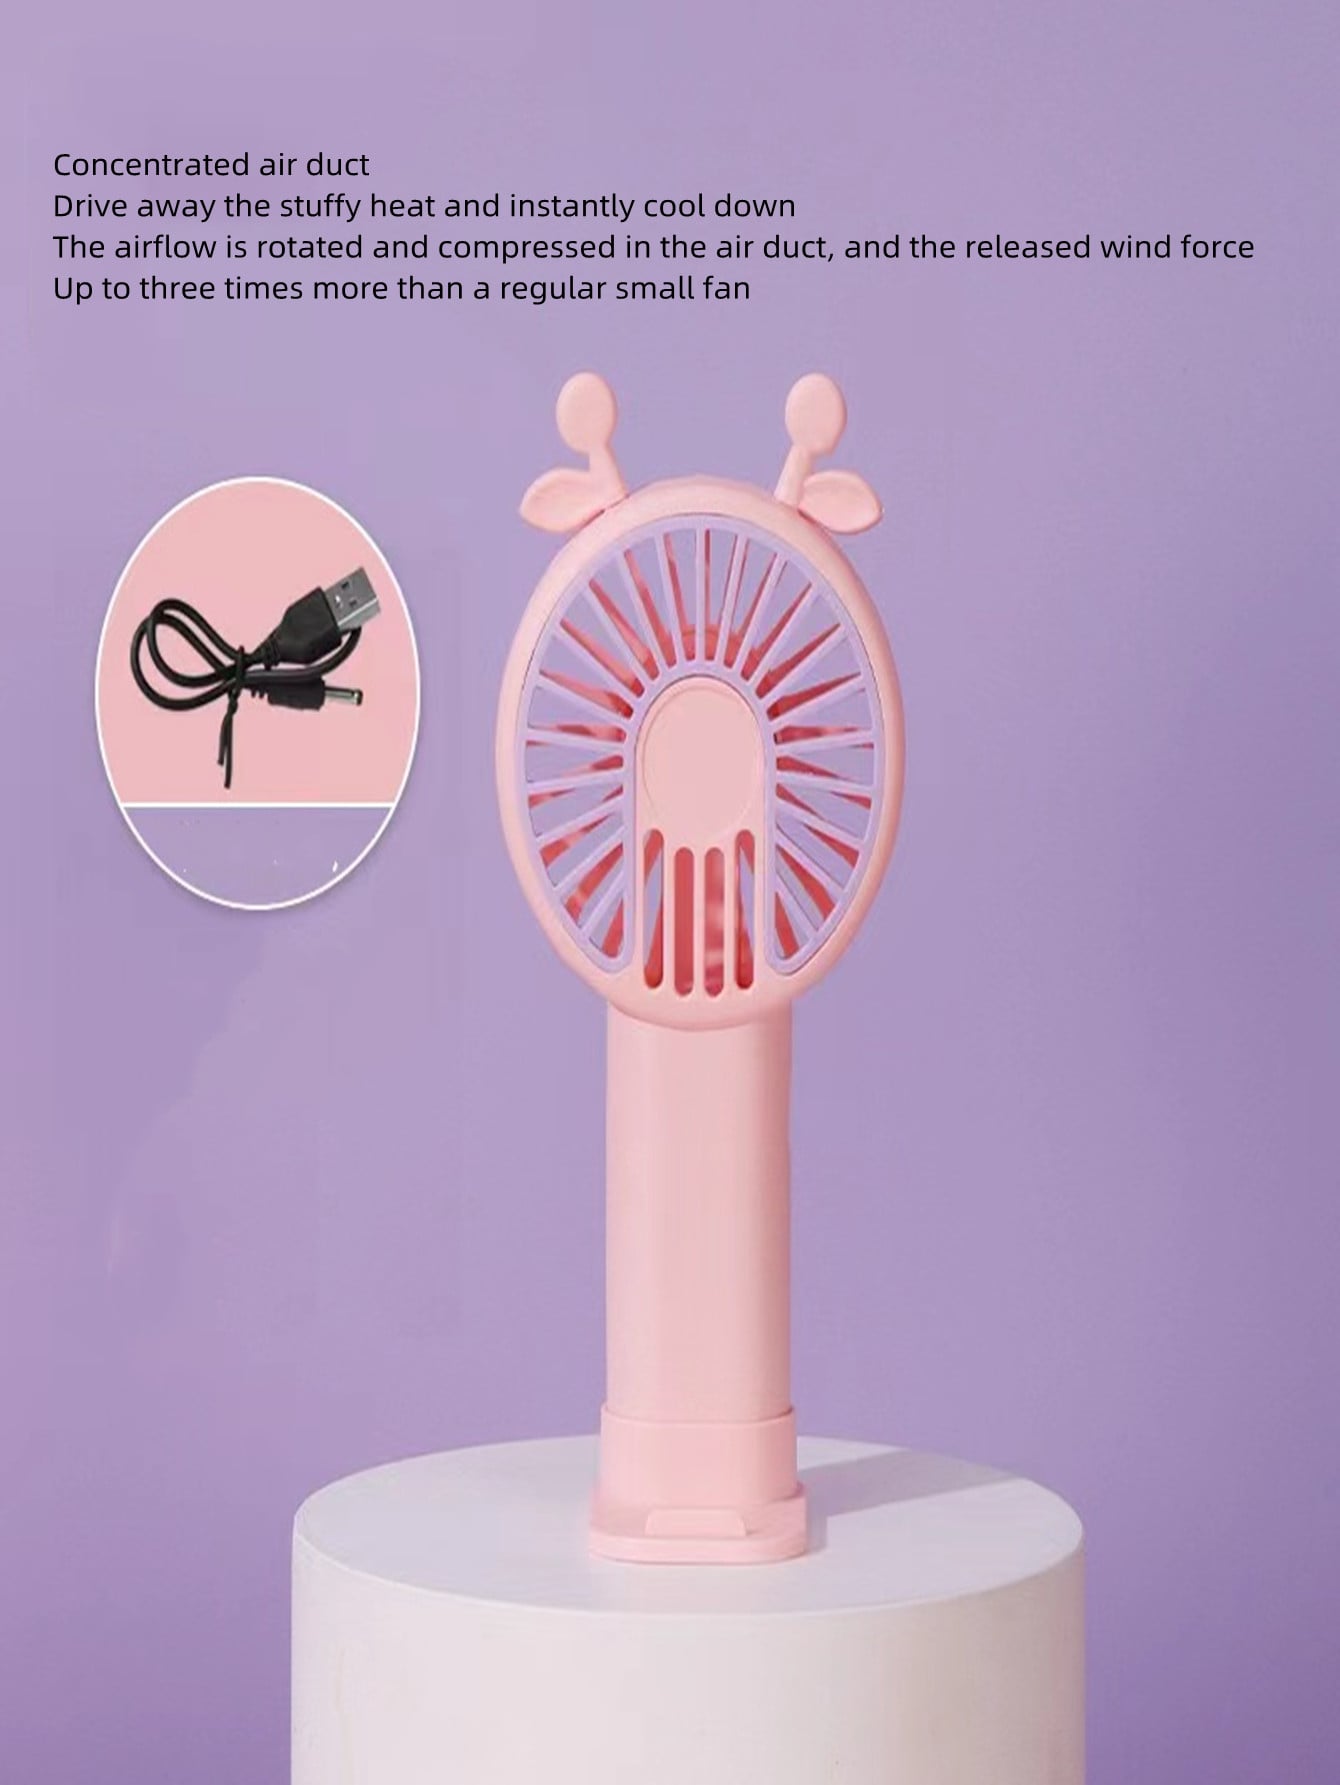 Portable Handheld Electric Fan With High Wind Power, Rechargeable, Suitable For Cars, School, Camping, And Manual Operation, Silent And Convenient.-Pink-2